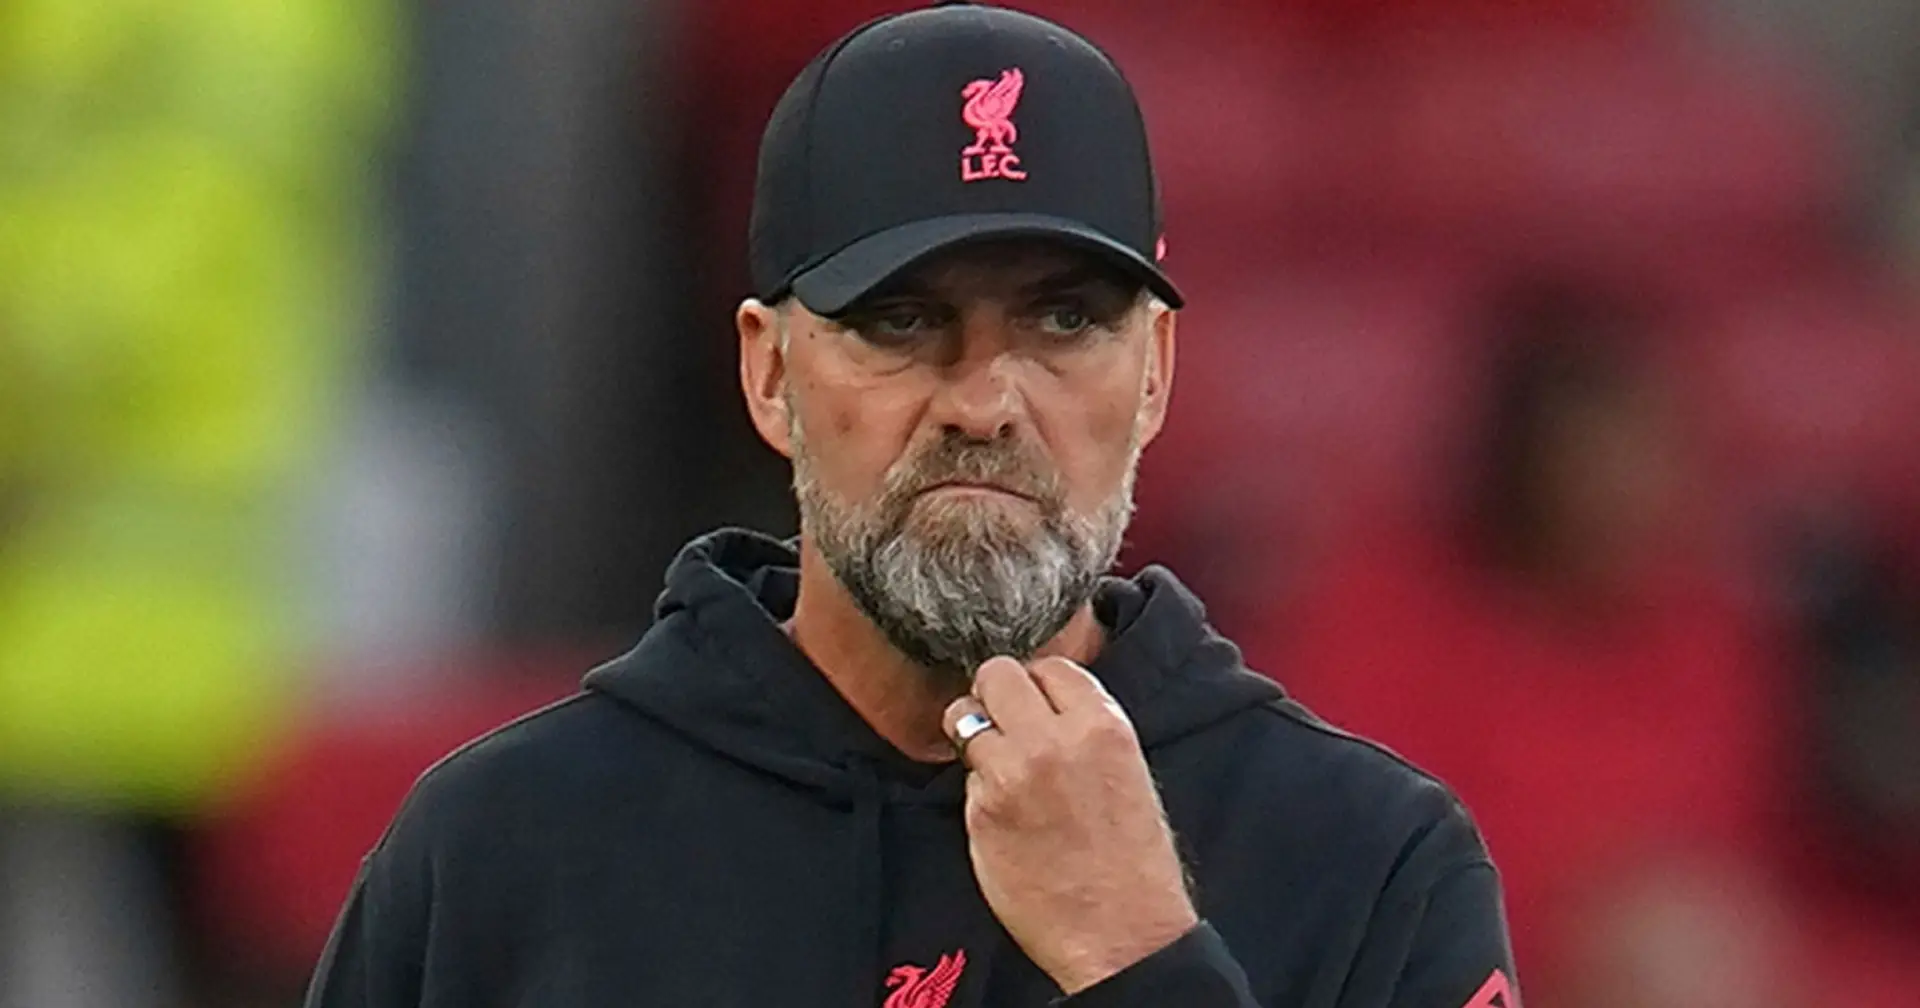 'That would be like final nail in the coffin': LFC fans have Klopp worry after Germany exits World Cup early